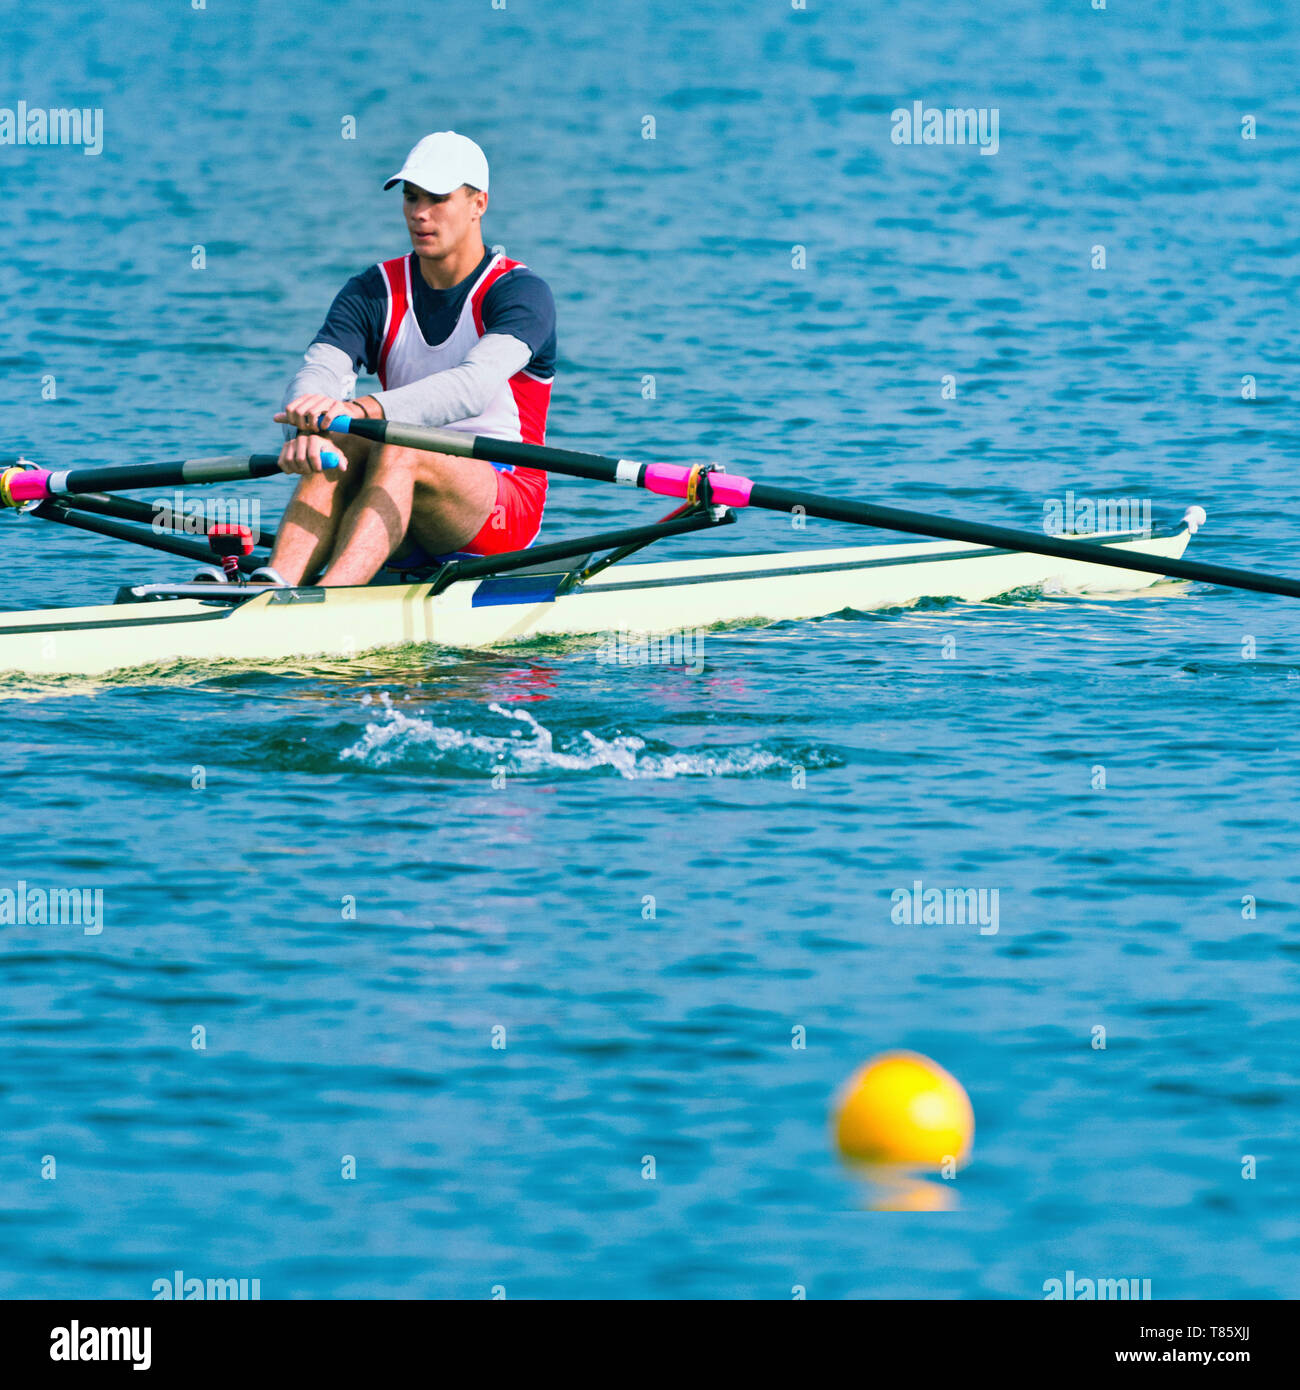 Man rowing scull Banque D'Images